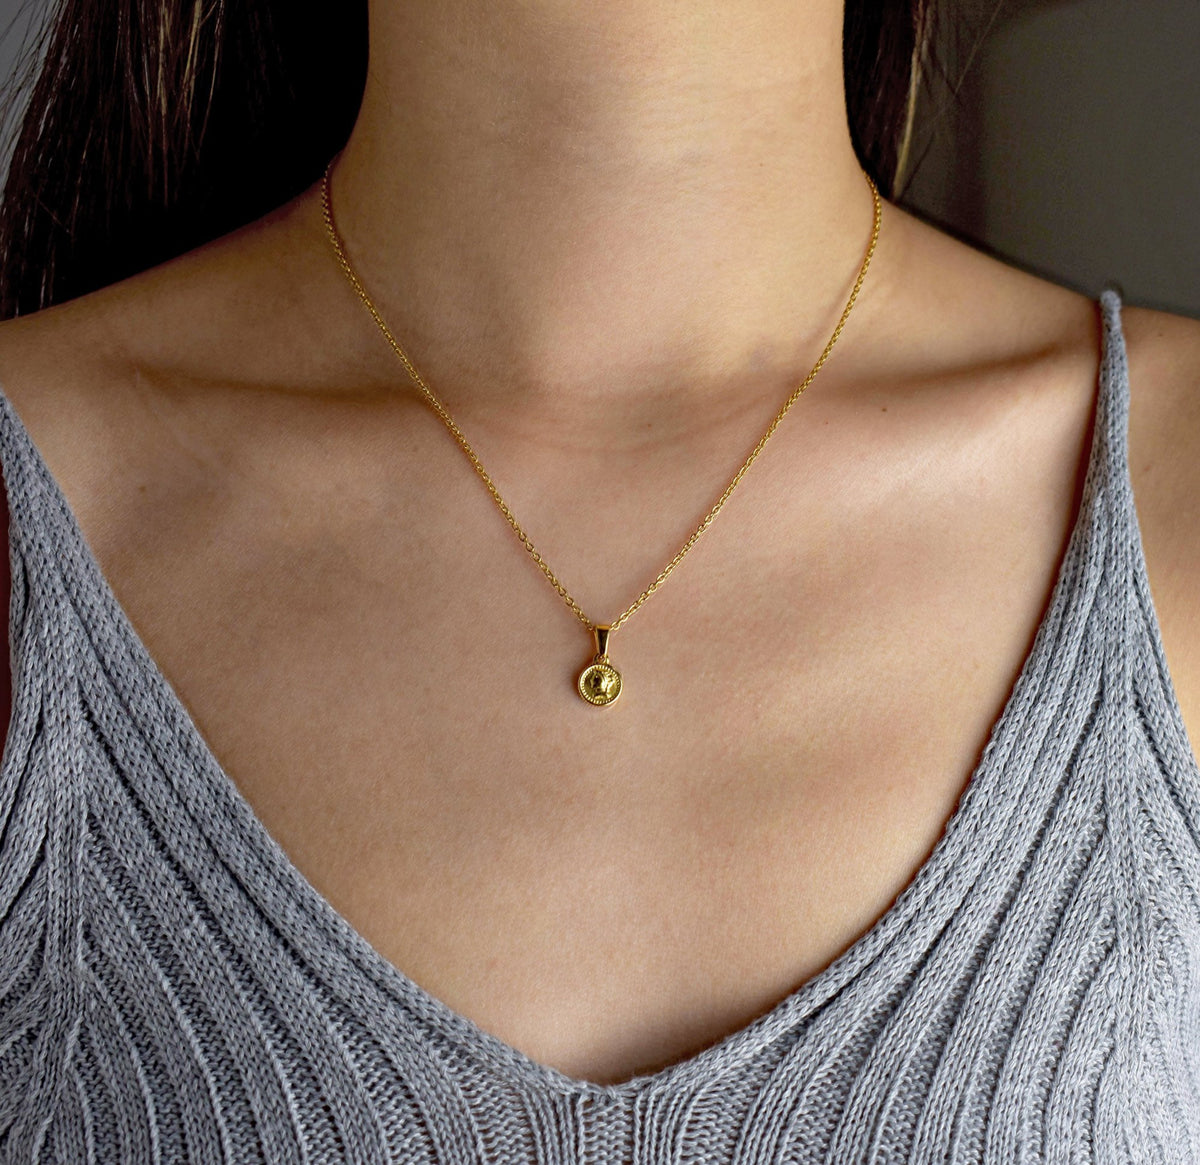 DAINTY COIN NECKLACE WATER PROOF JEWELRY